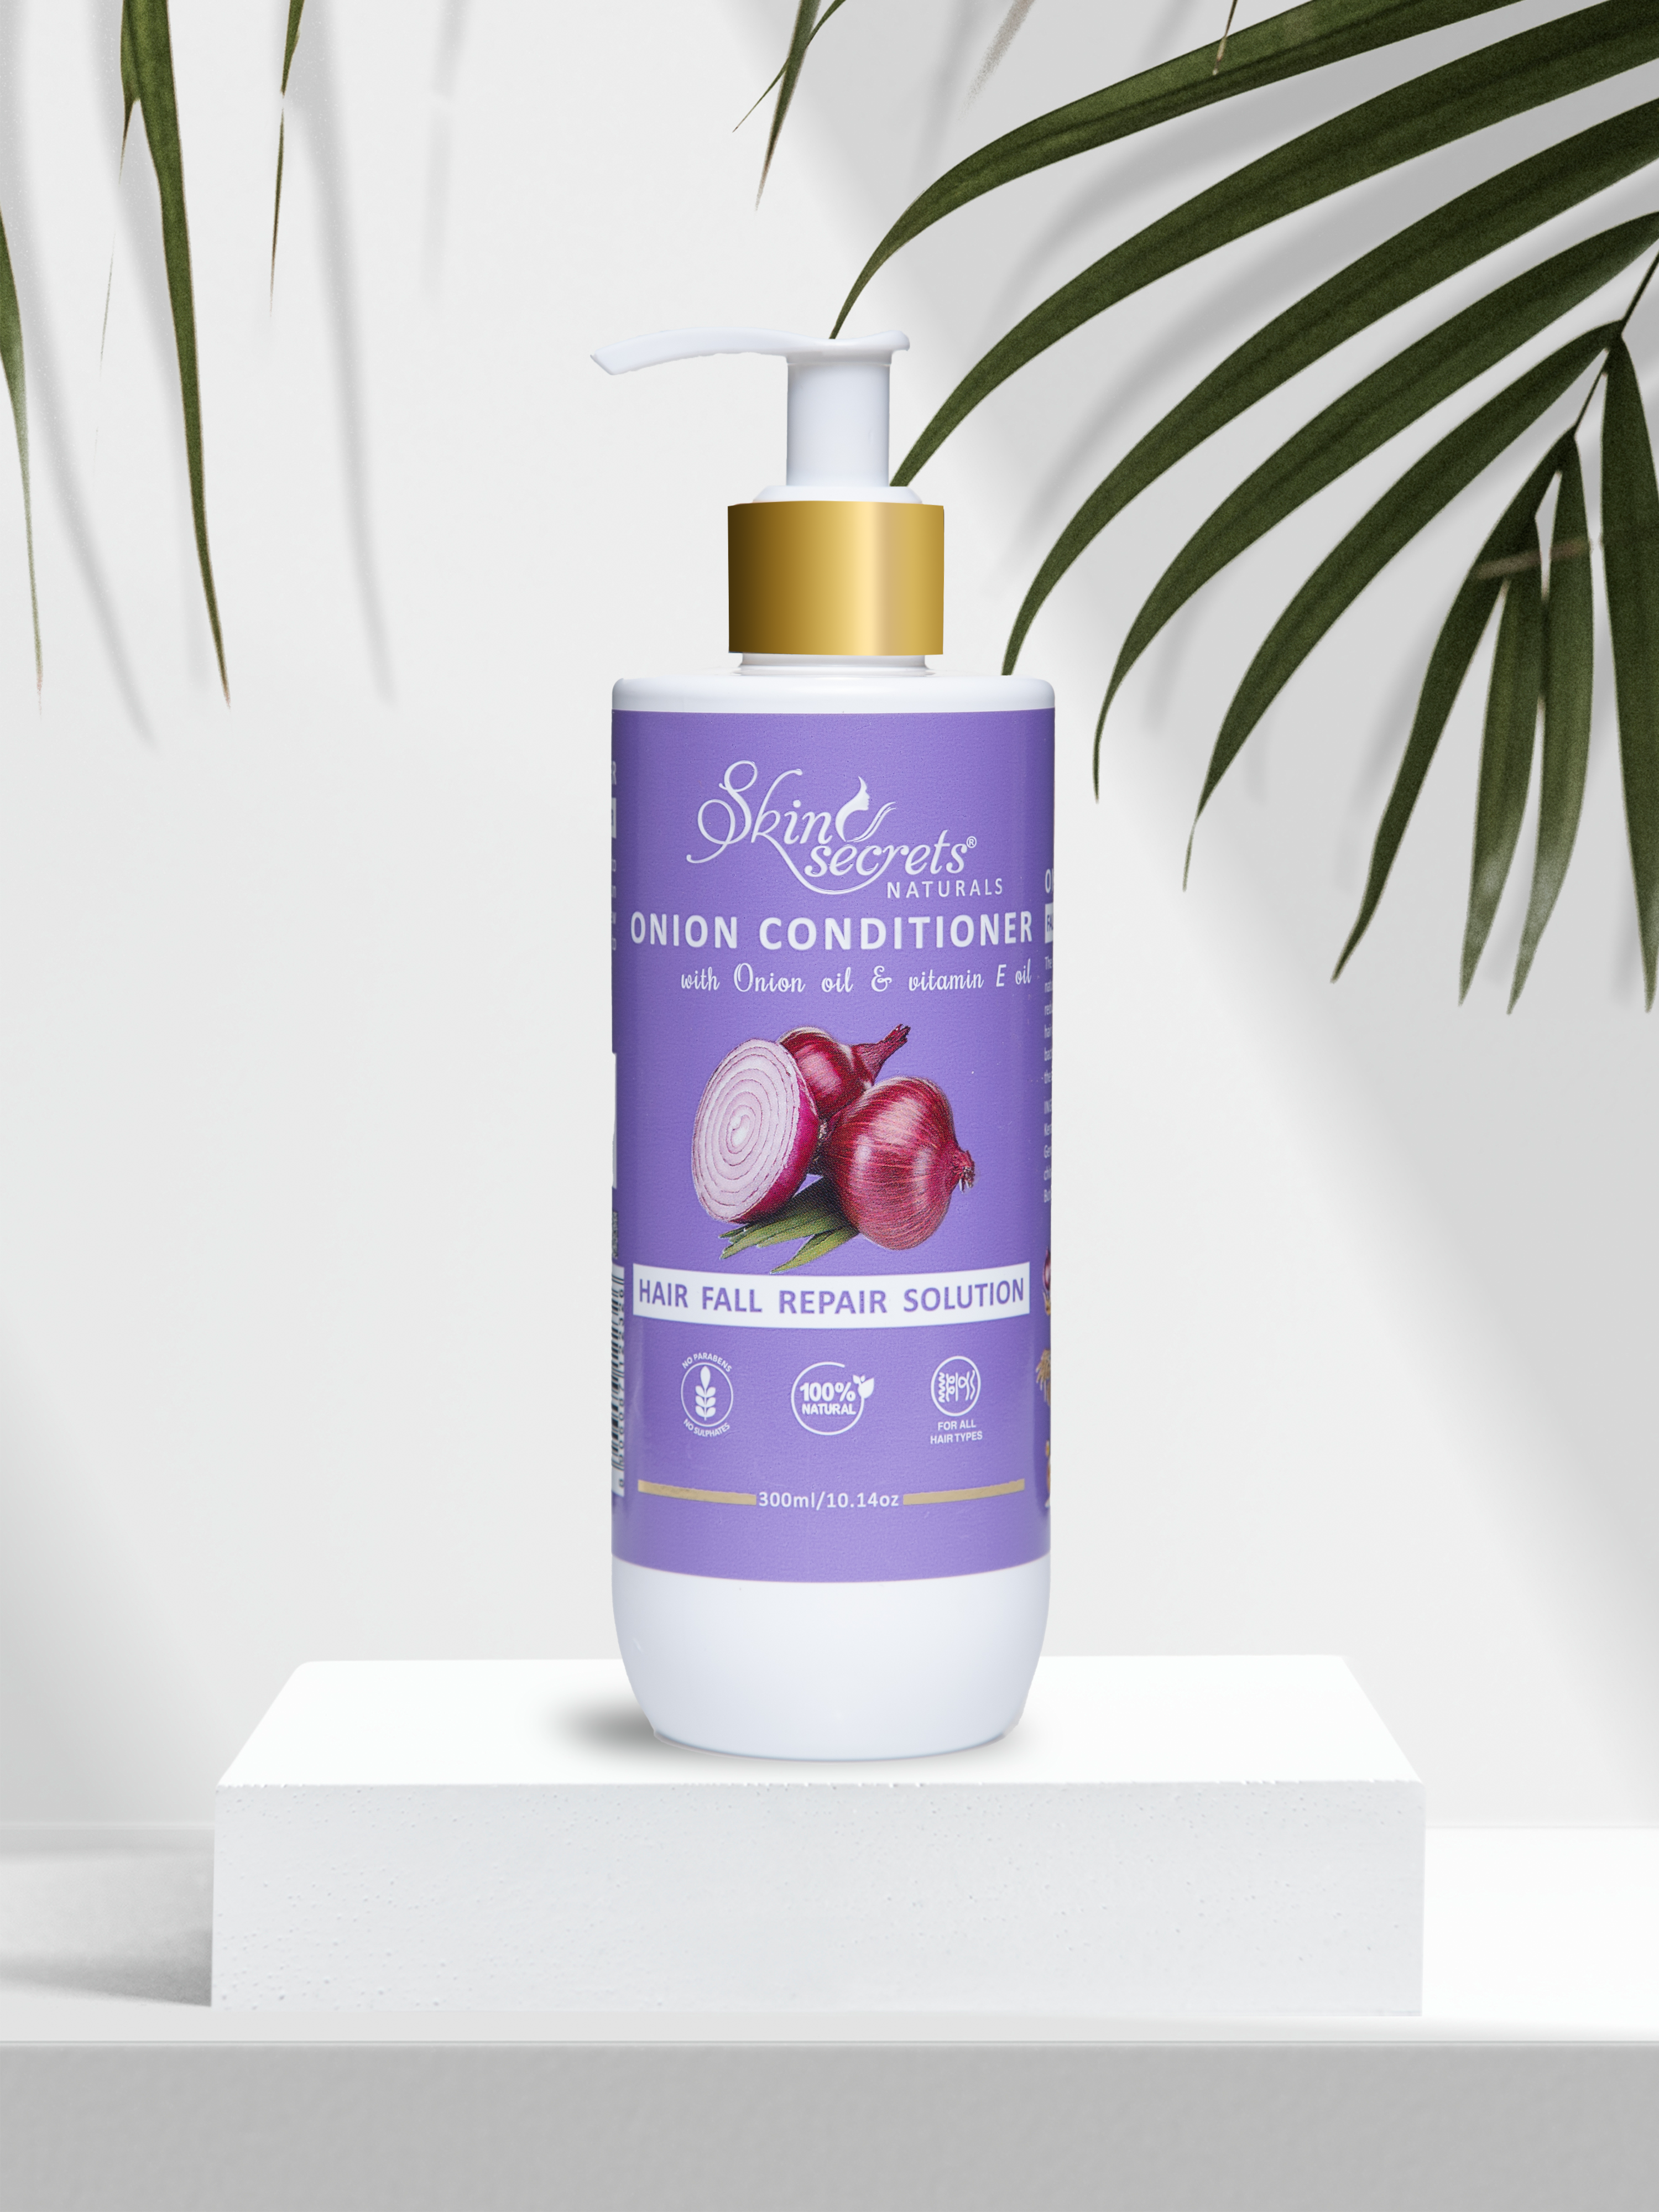 Onion Conditioner with Onion Seed Extract & Pro-Vitamin B5| No Parabens, Mineral Oil, Silicones, Color| 300ml